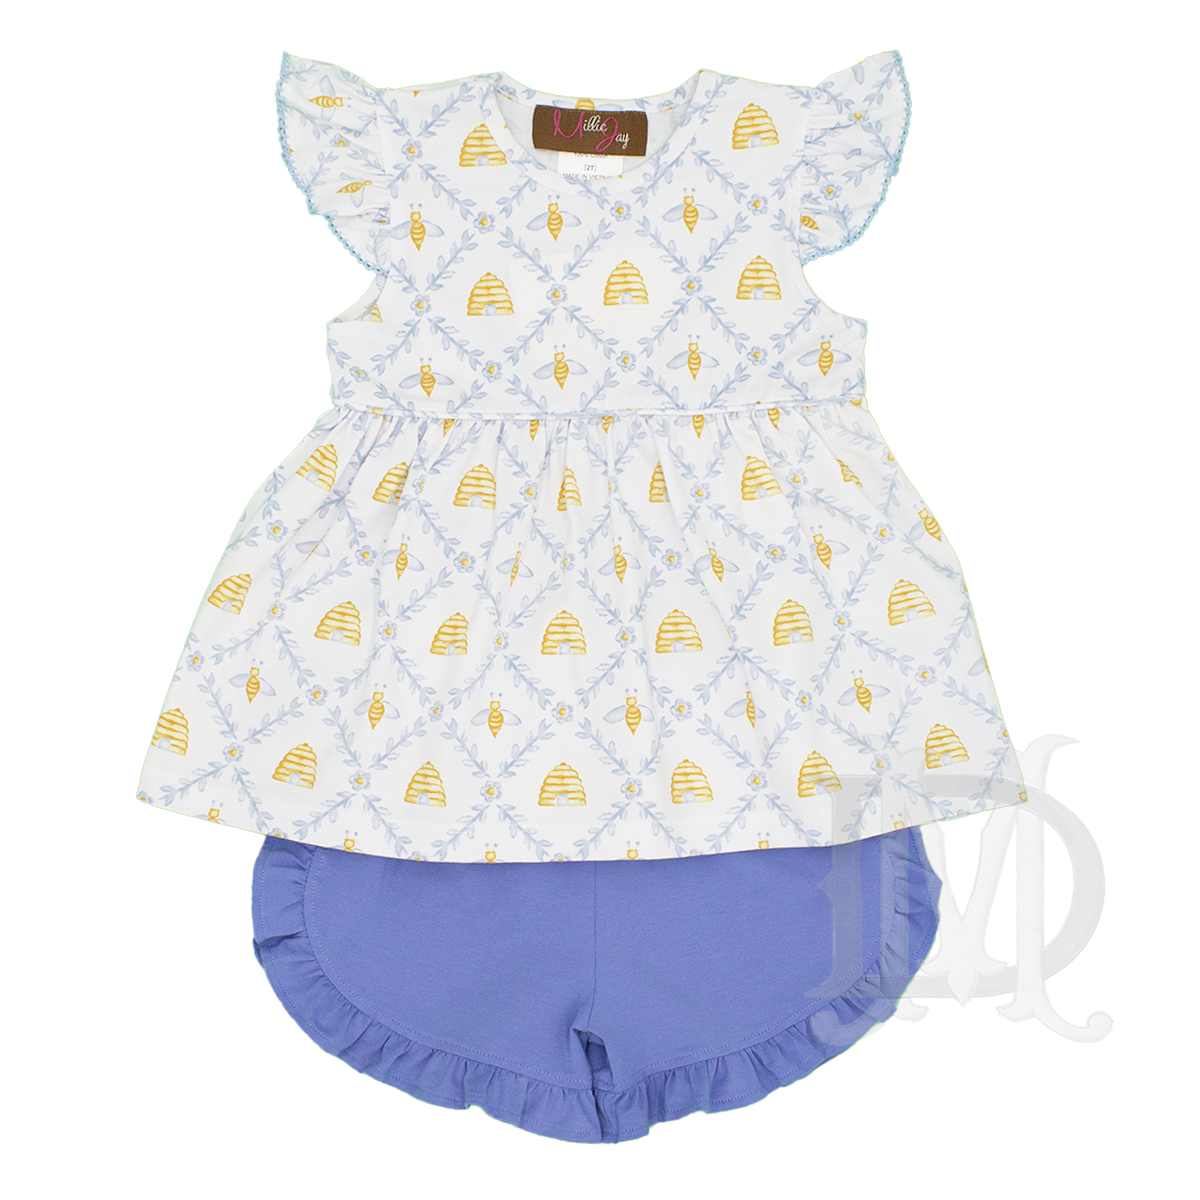 Toddler Girl's Sweet as Honey Bee Print Shorts Set by Millie Jay